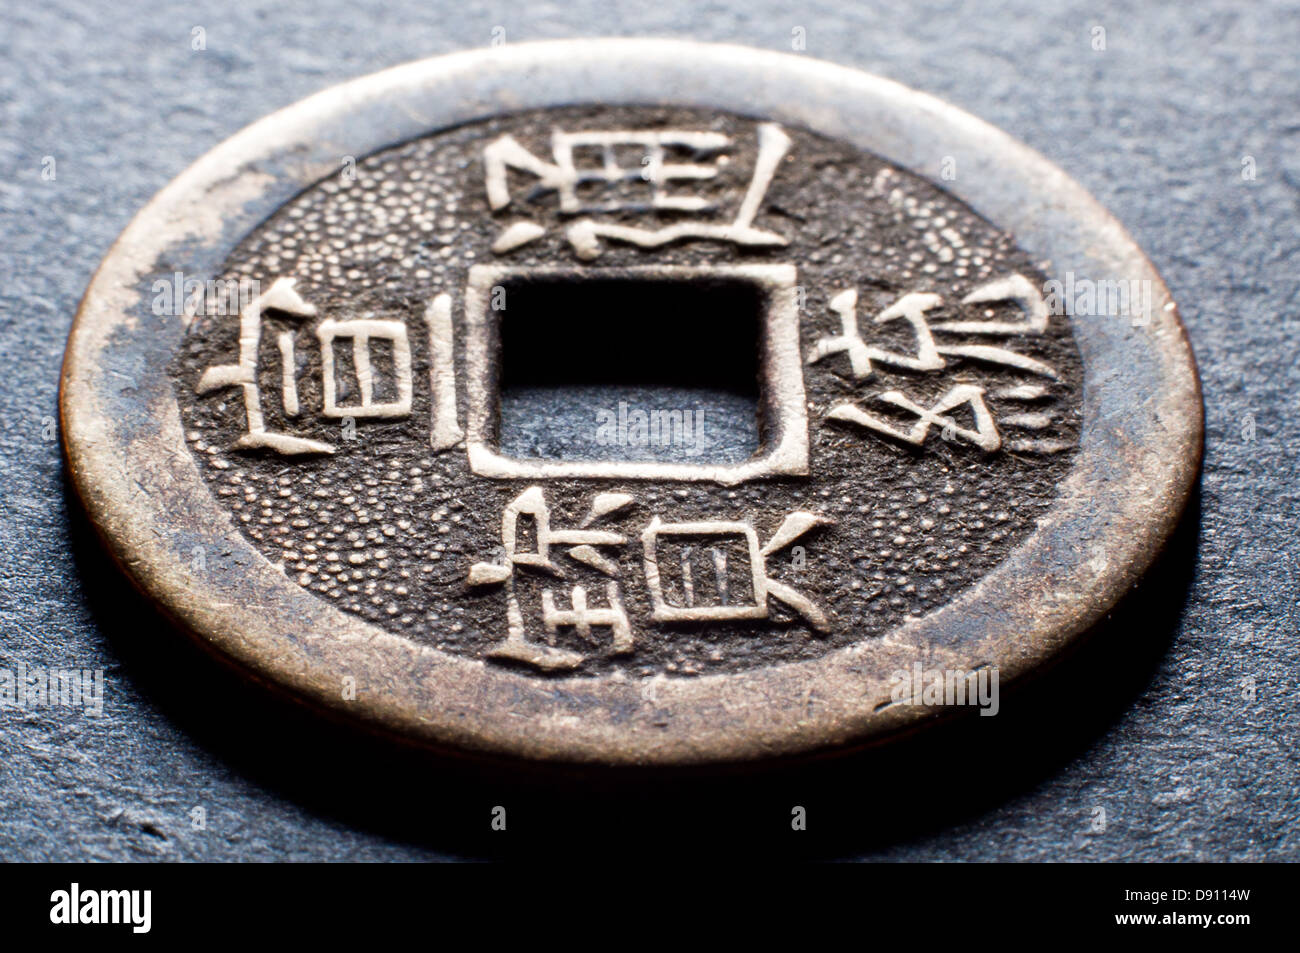 chinese coin in studio setting Stock Photo